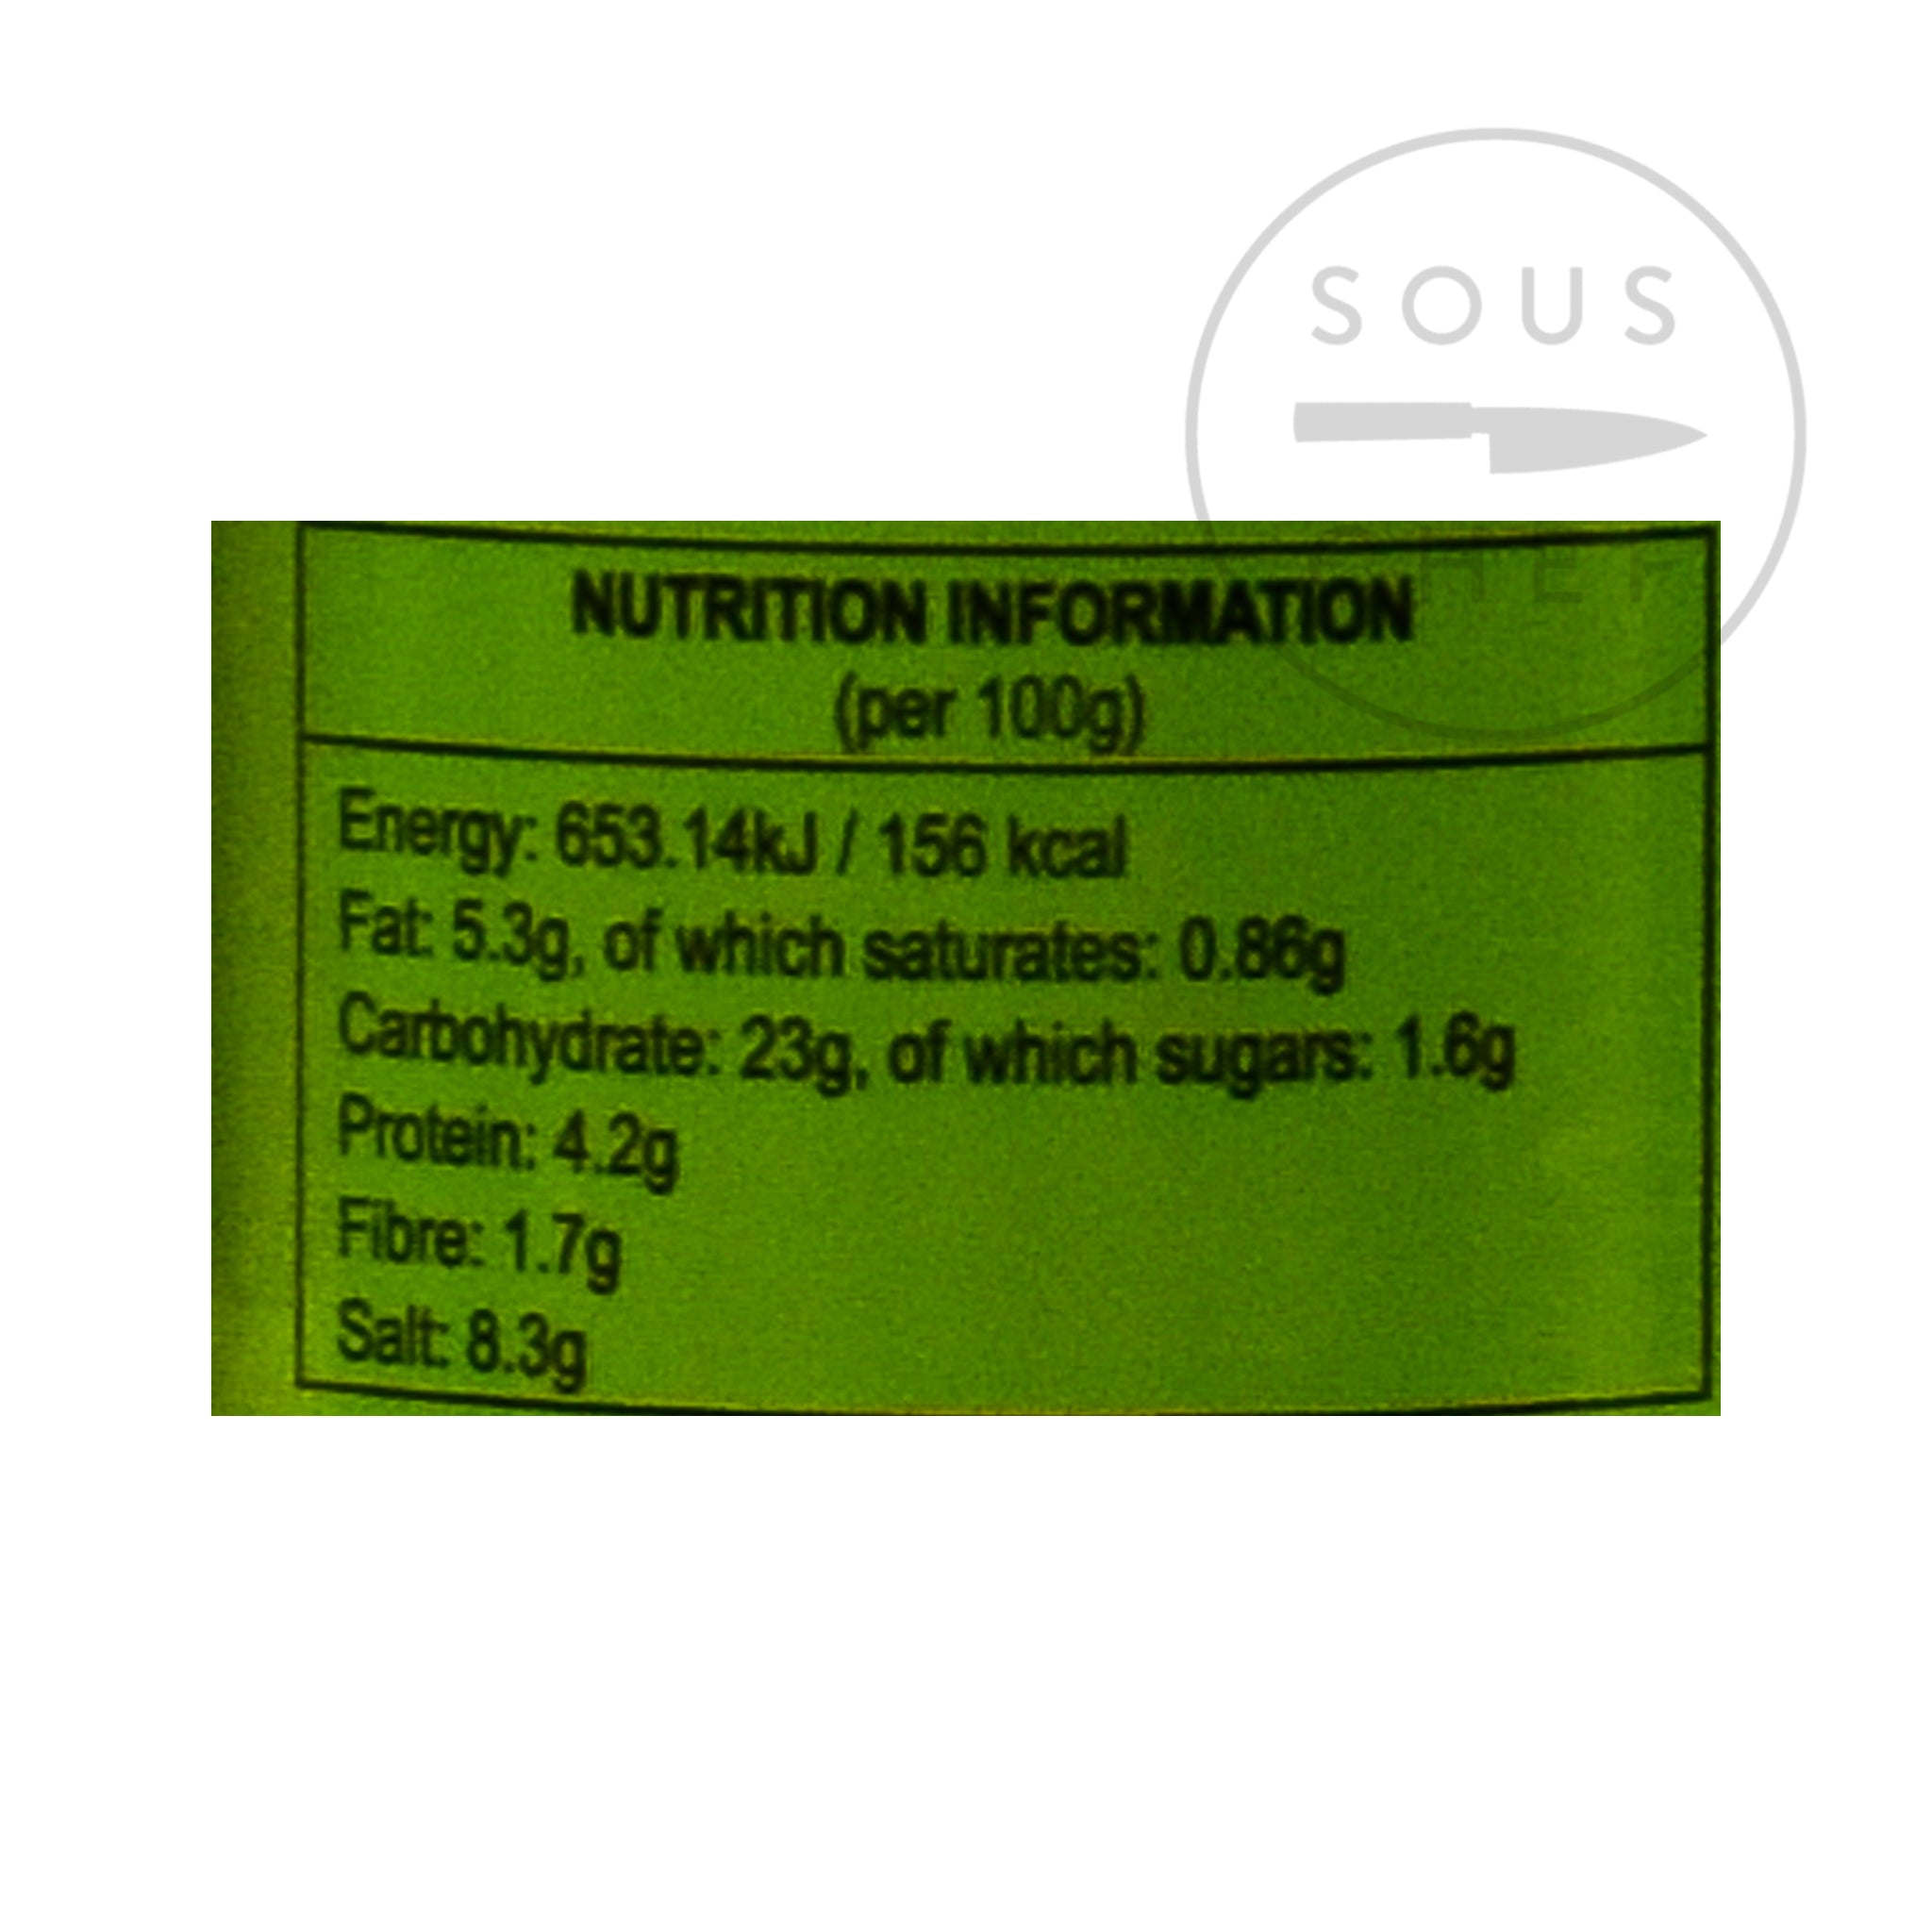 Ferns' Hot Curry Paste 380g nutritional information